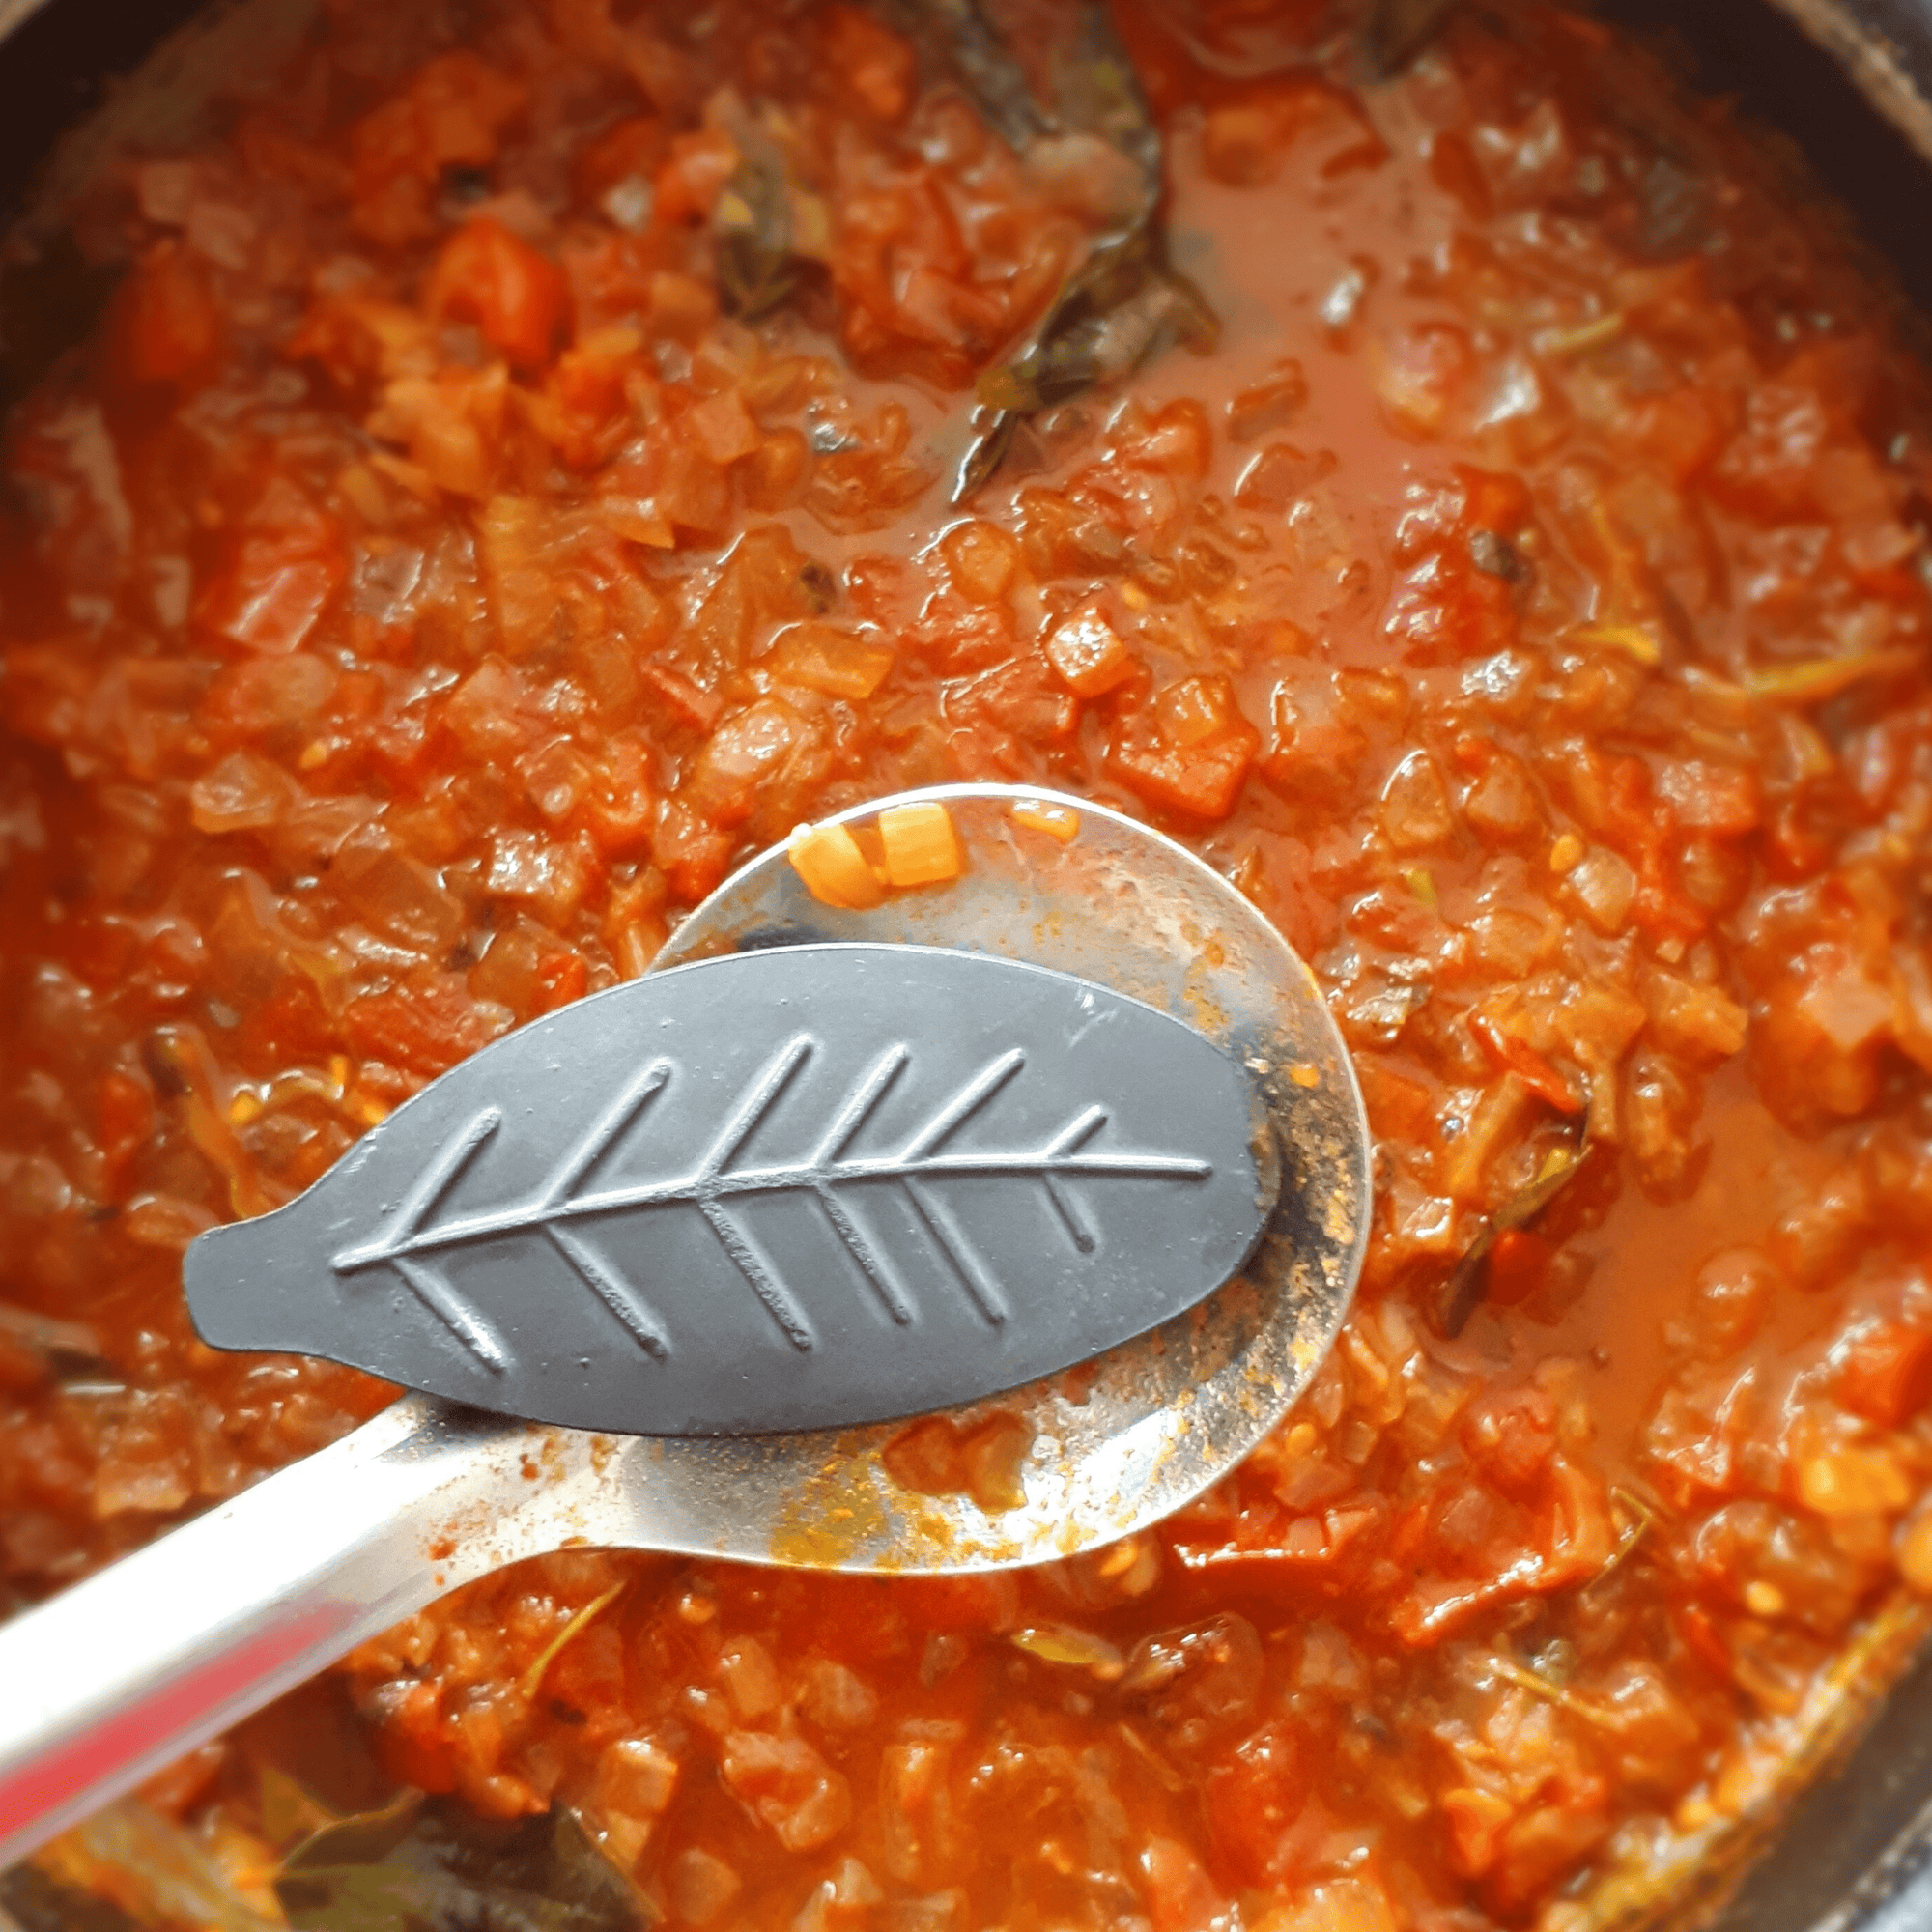 Lucky Iron Leaf cooking with tomato sauce